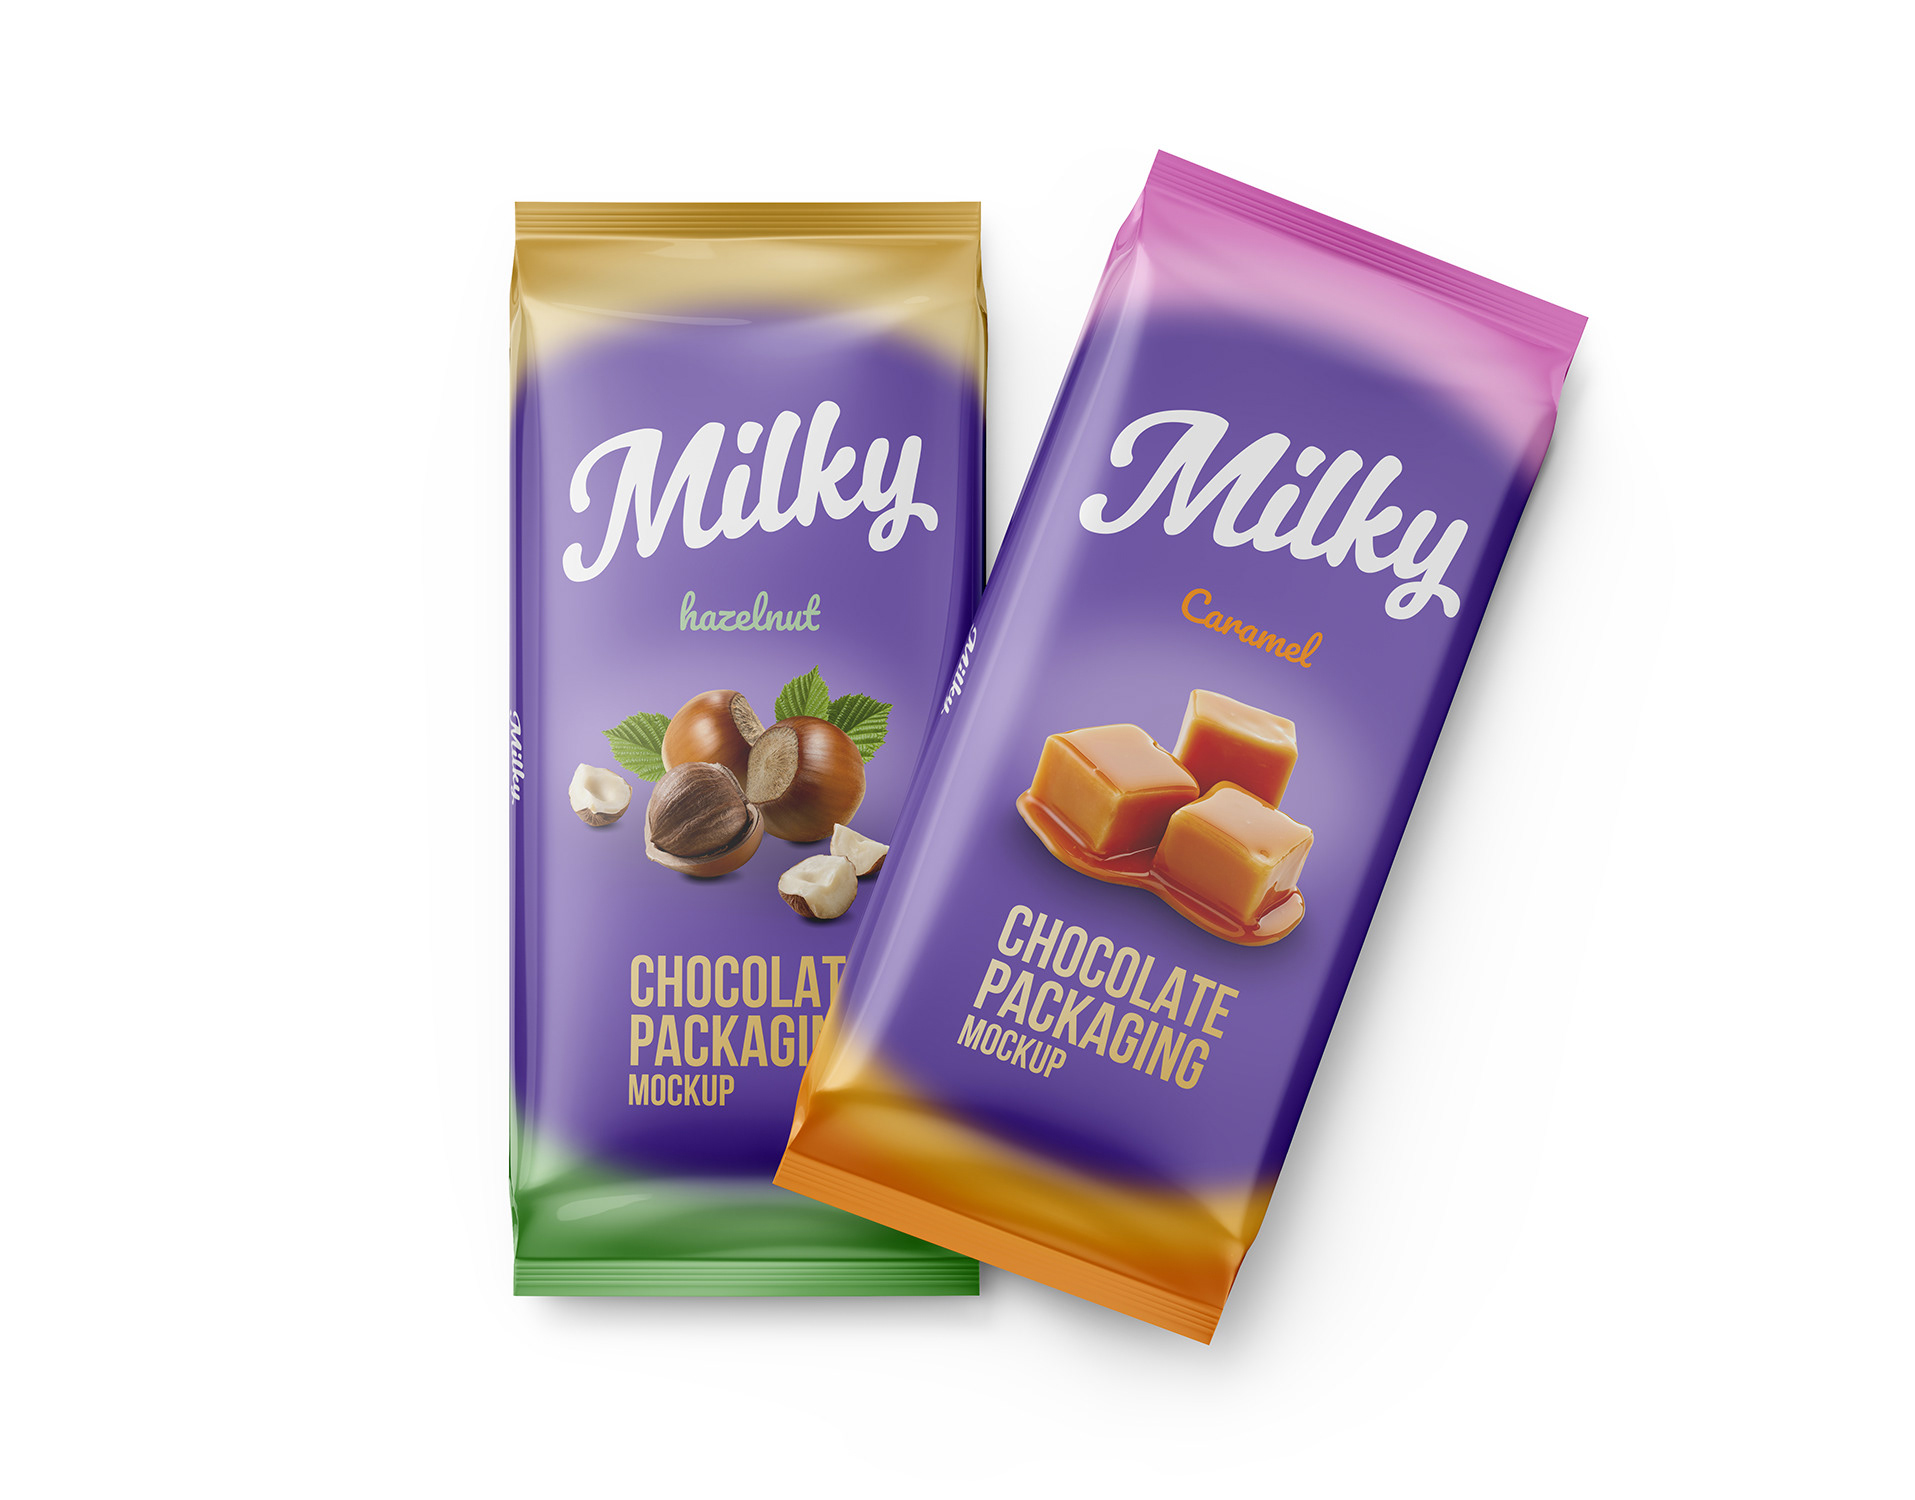 Download Exclusive Product Mockups Two Chocolate Packaging Mockup PSD Mockup Templates